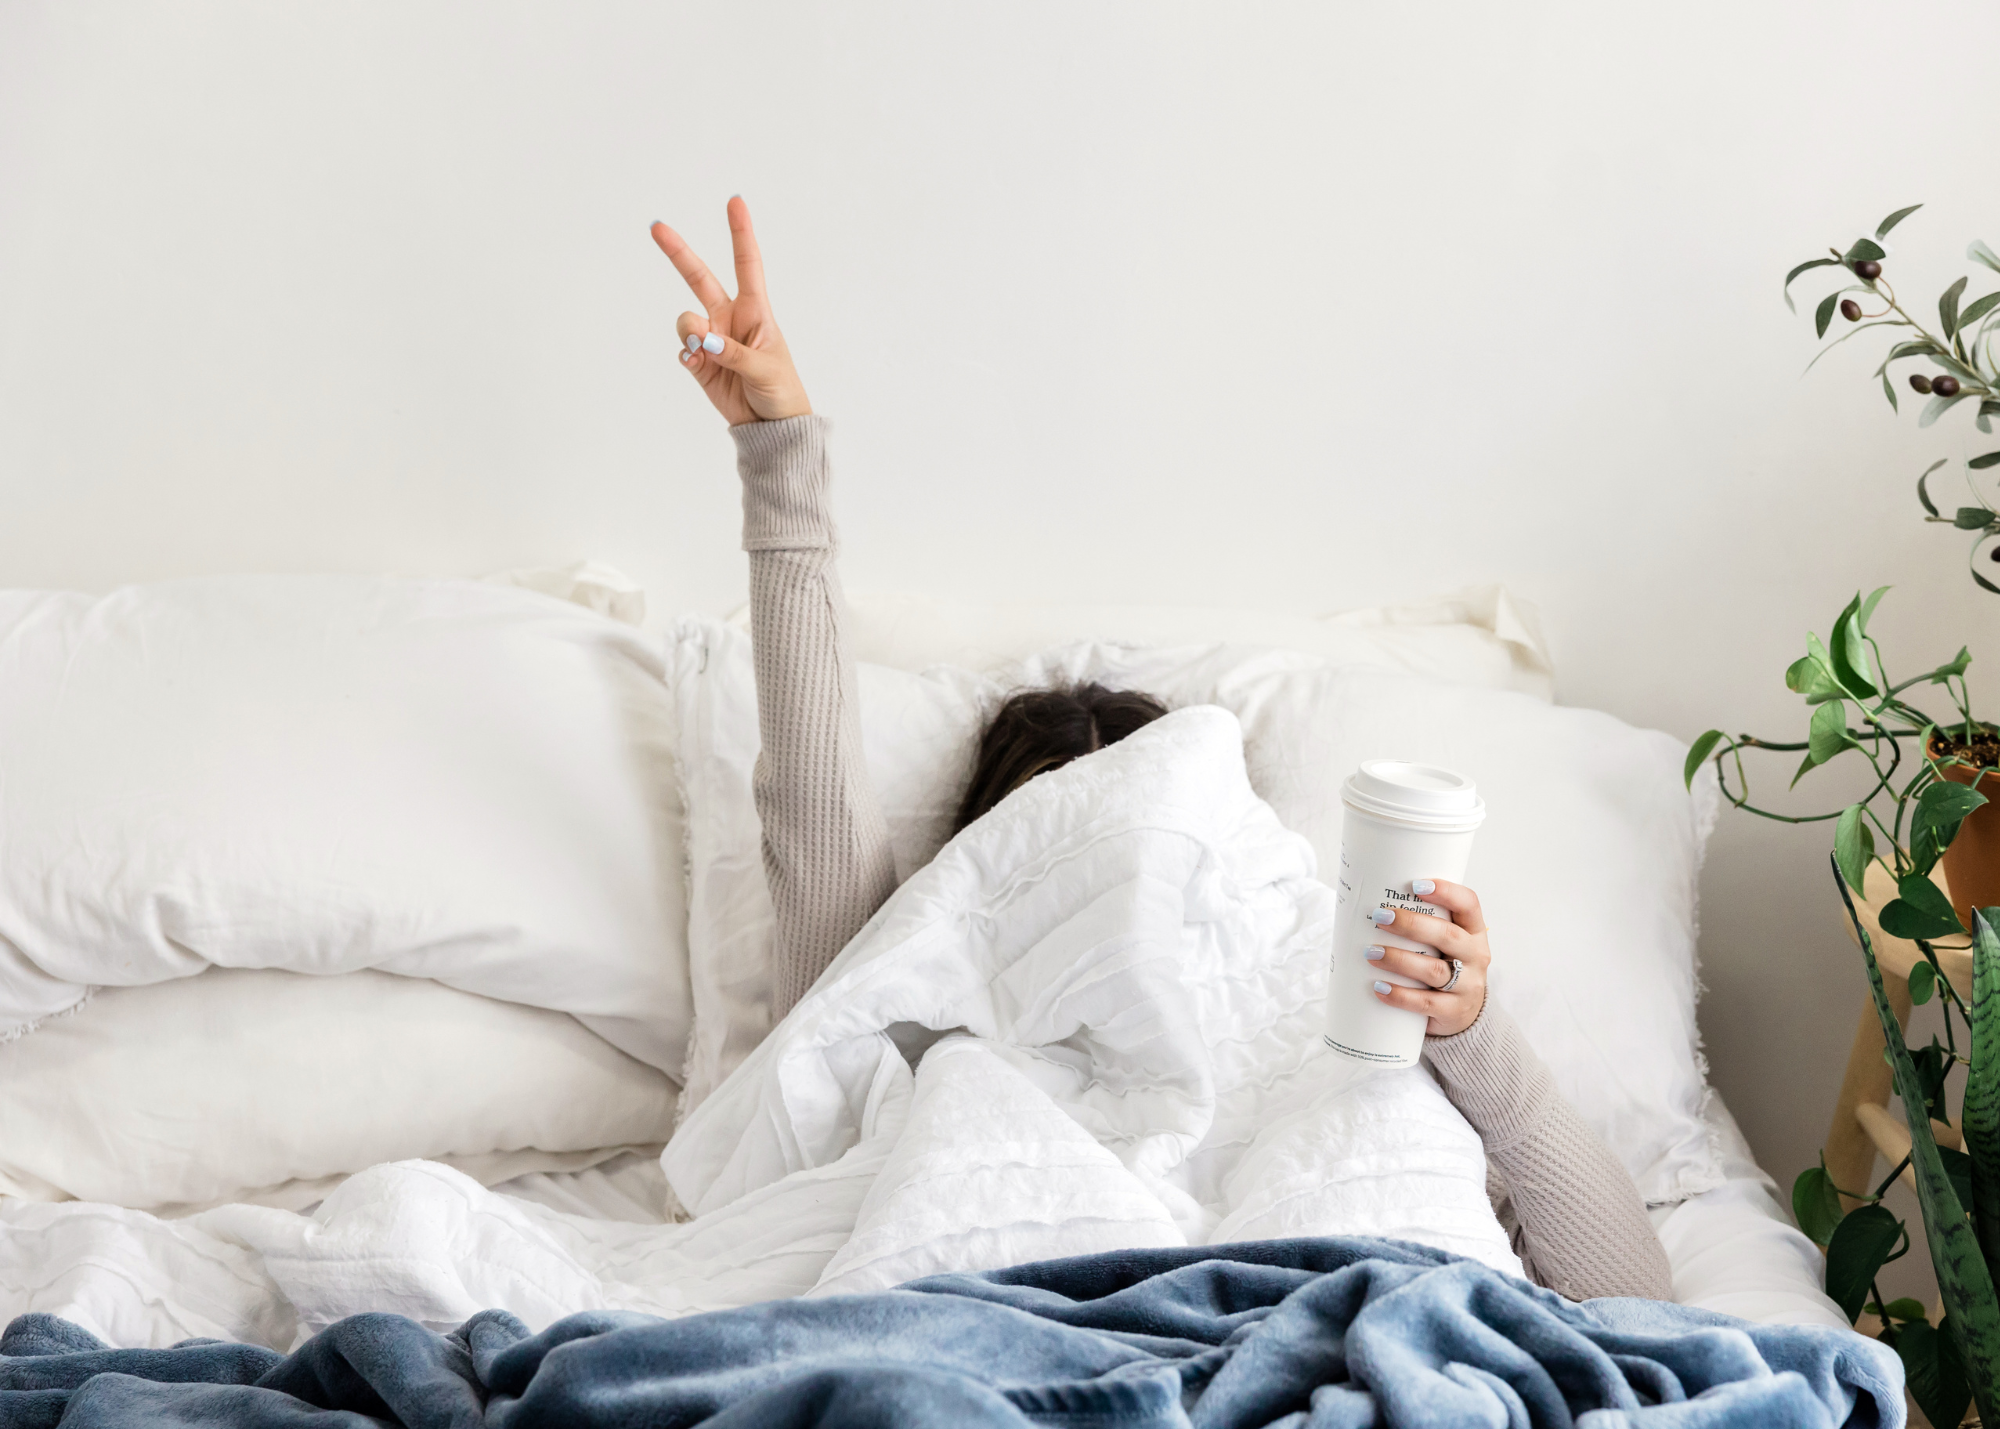 Person under covers in bed showing peace sign